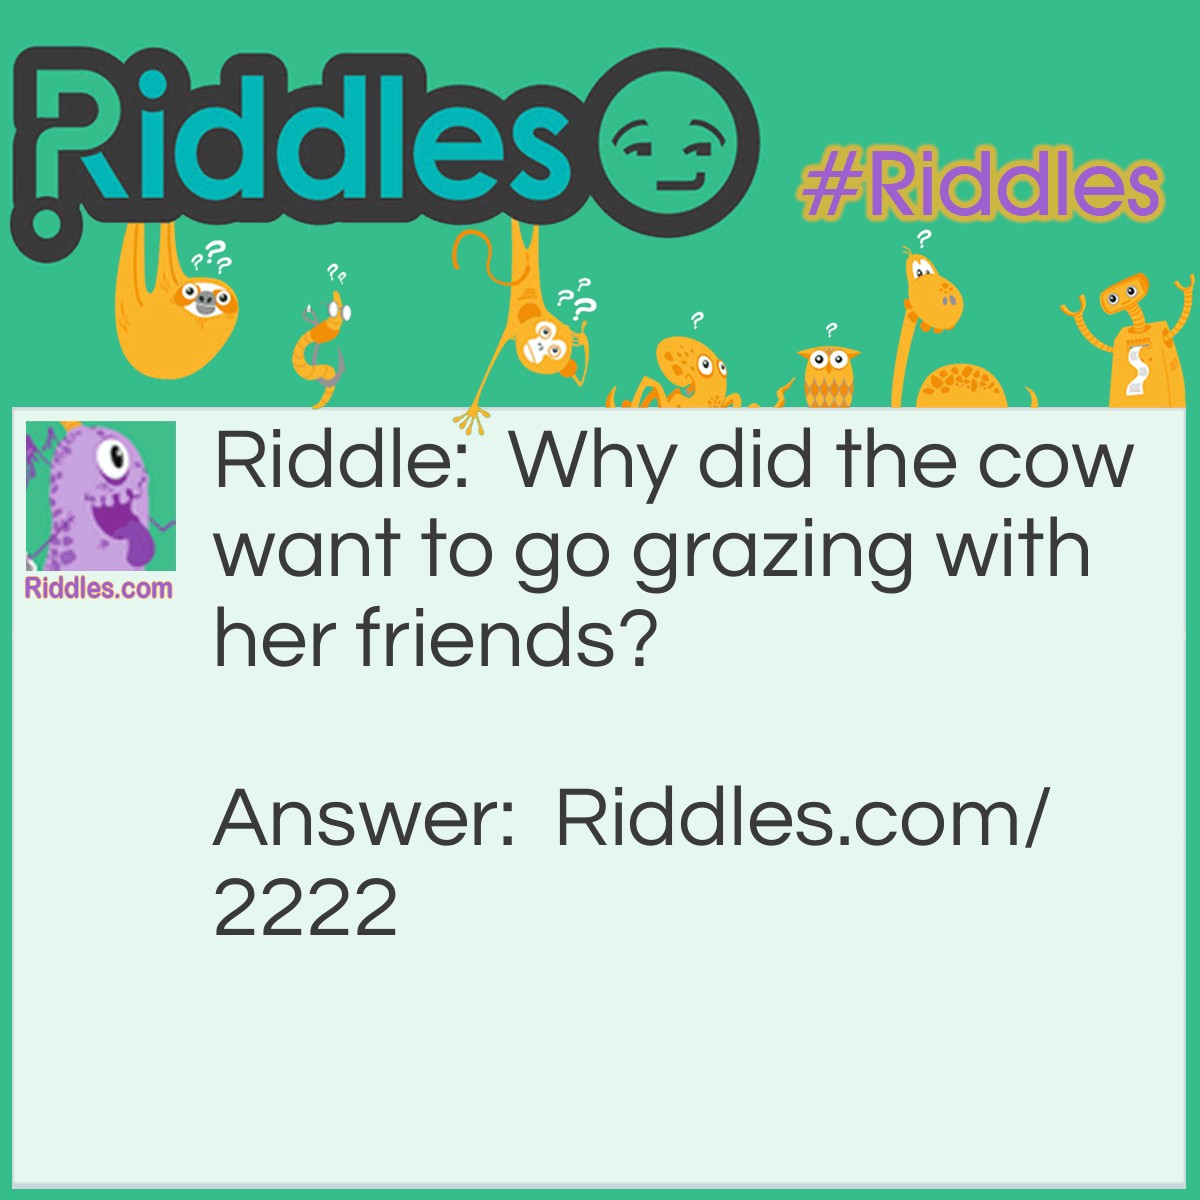 Riddle: Why did the cow want to go grazing with her friends? Answer: She wasn't in the moo-d.